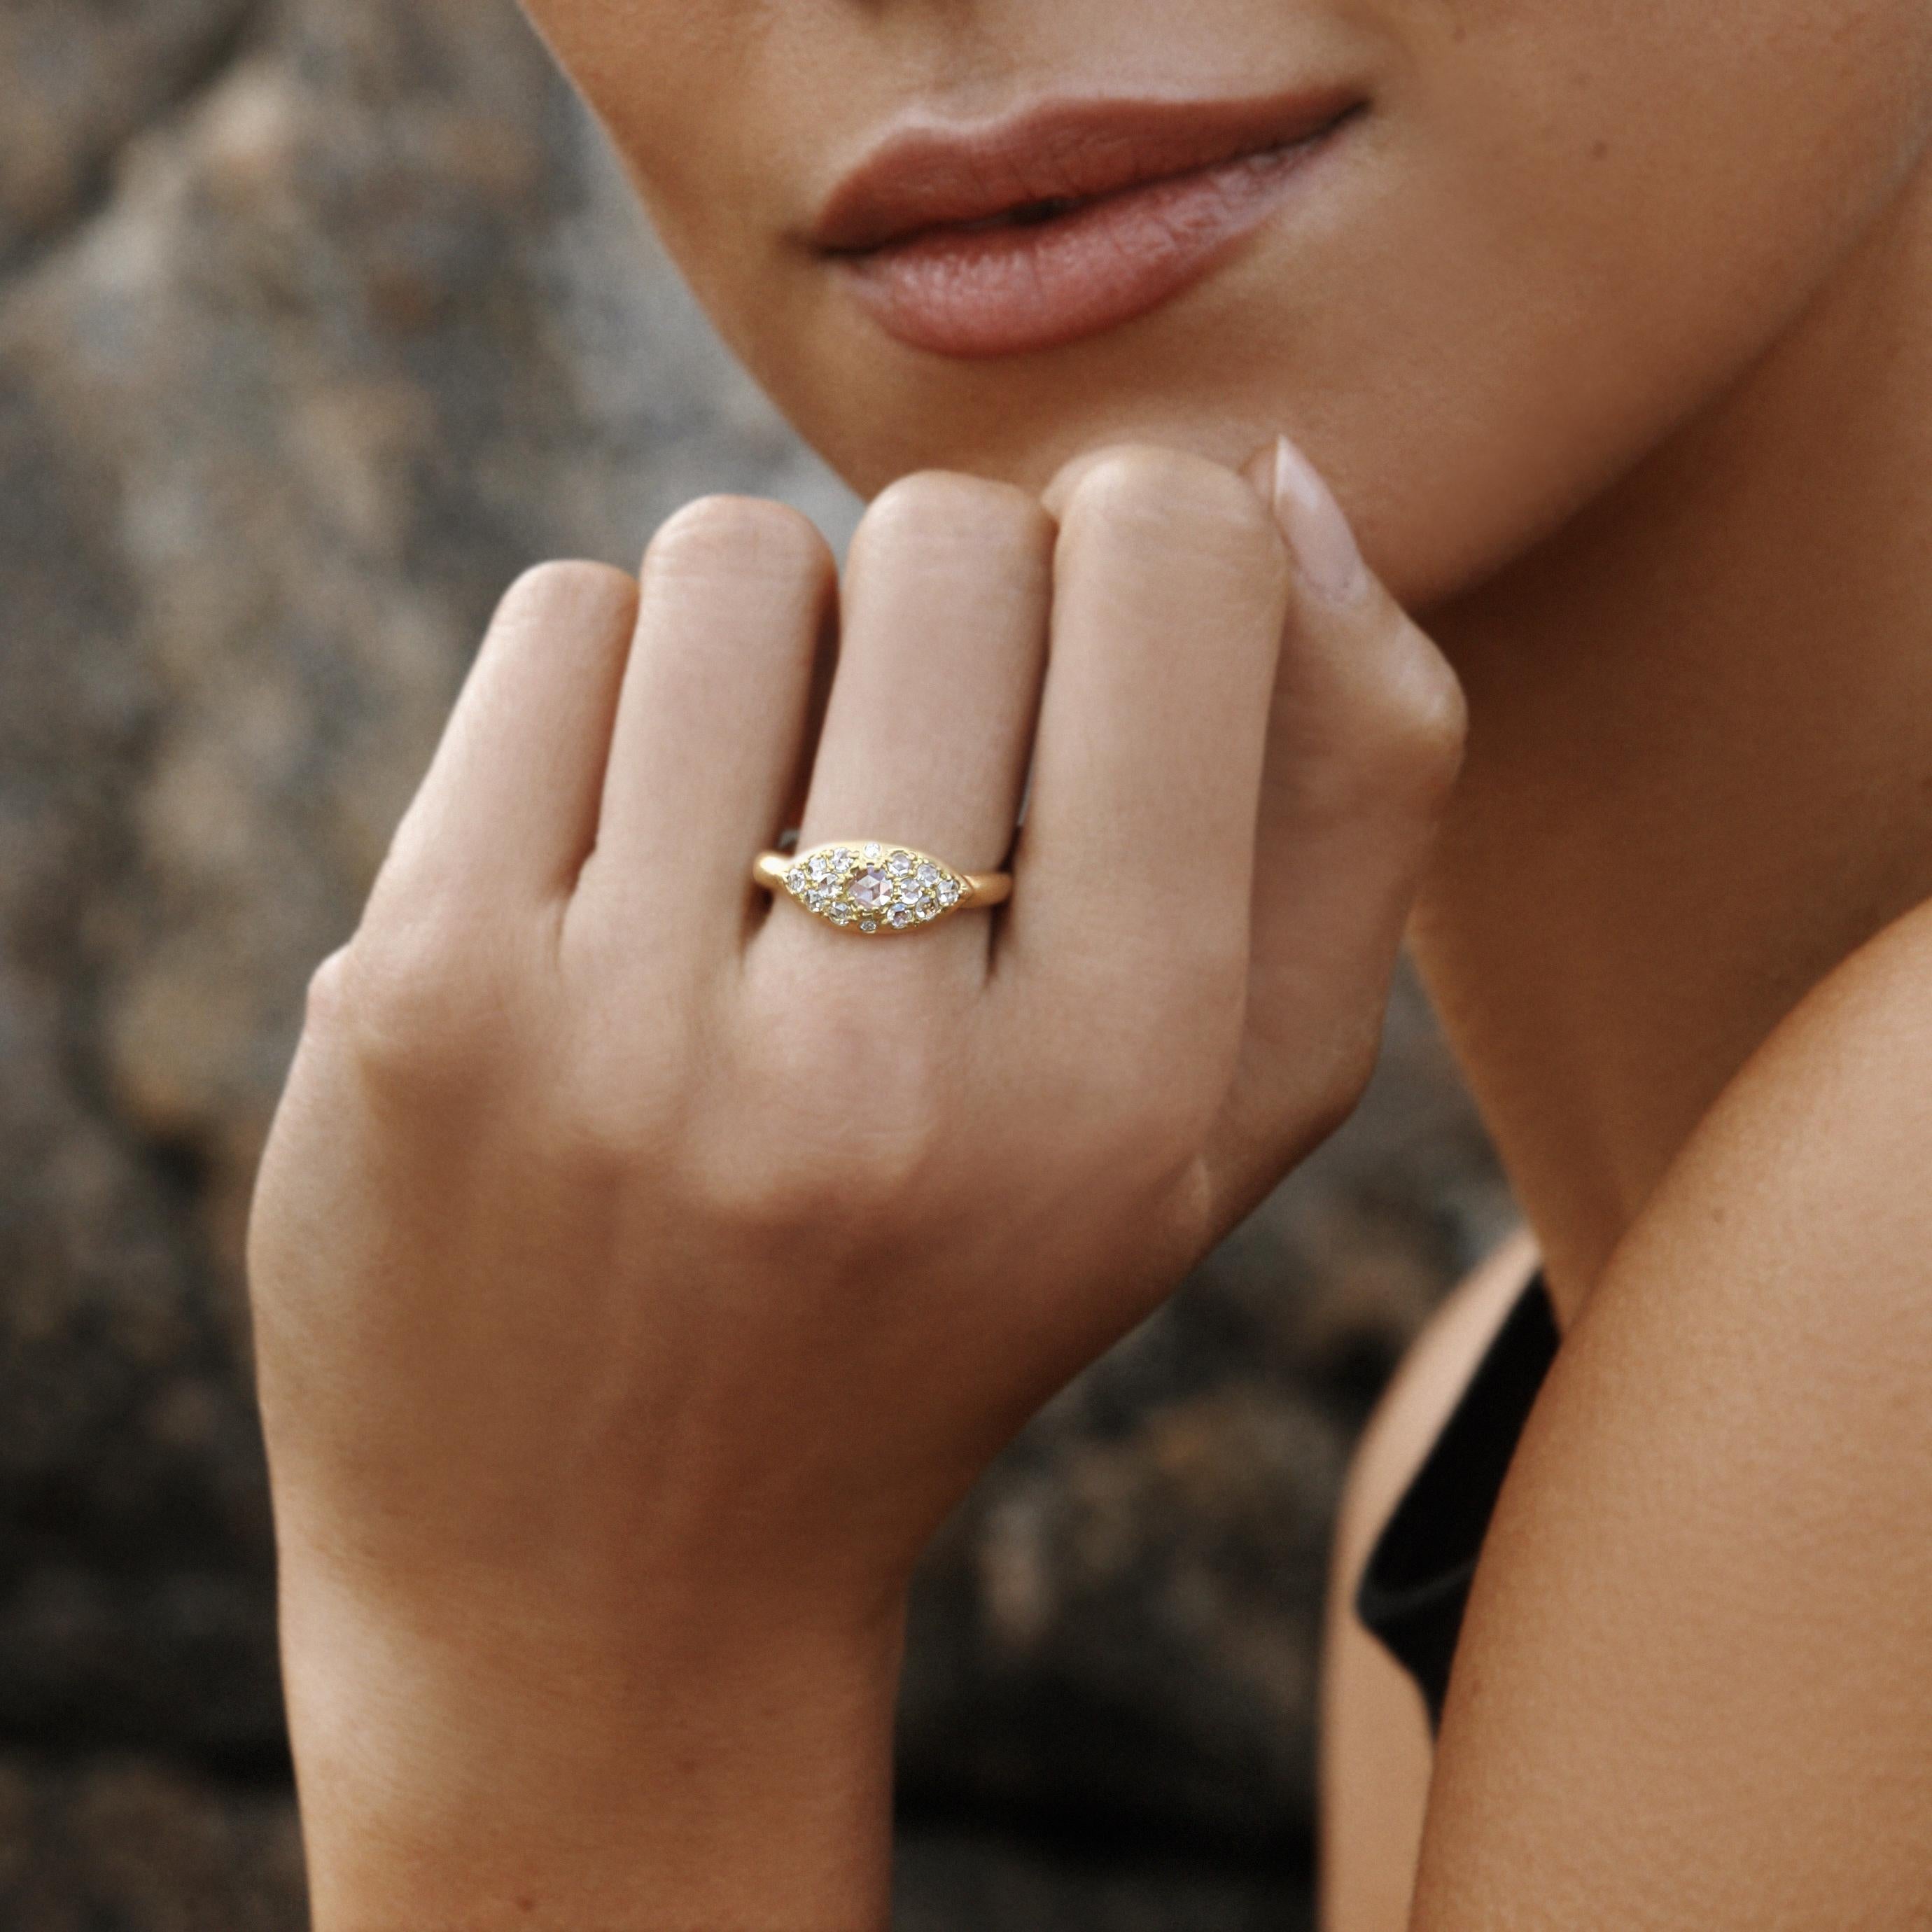 The 18kt yellow gold Classic Pillow ring is exceptionally lifestyle friendly with its contoured band which is flush to the finger. The captivating light play is created by white rose cut diamonds which cover the curved surface and display an endless